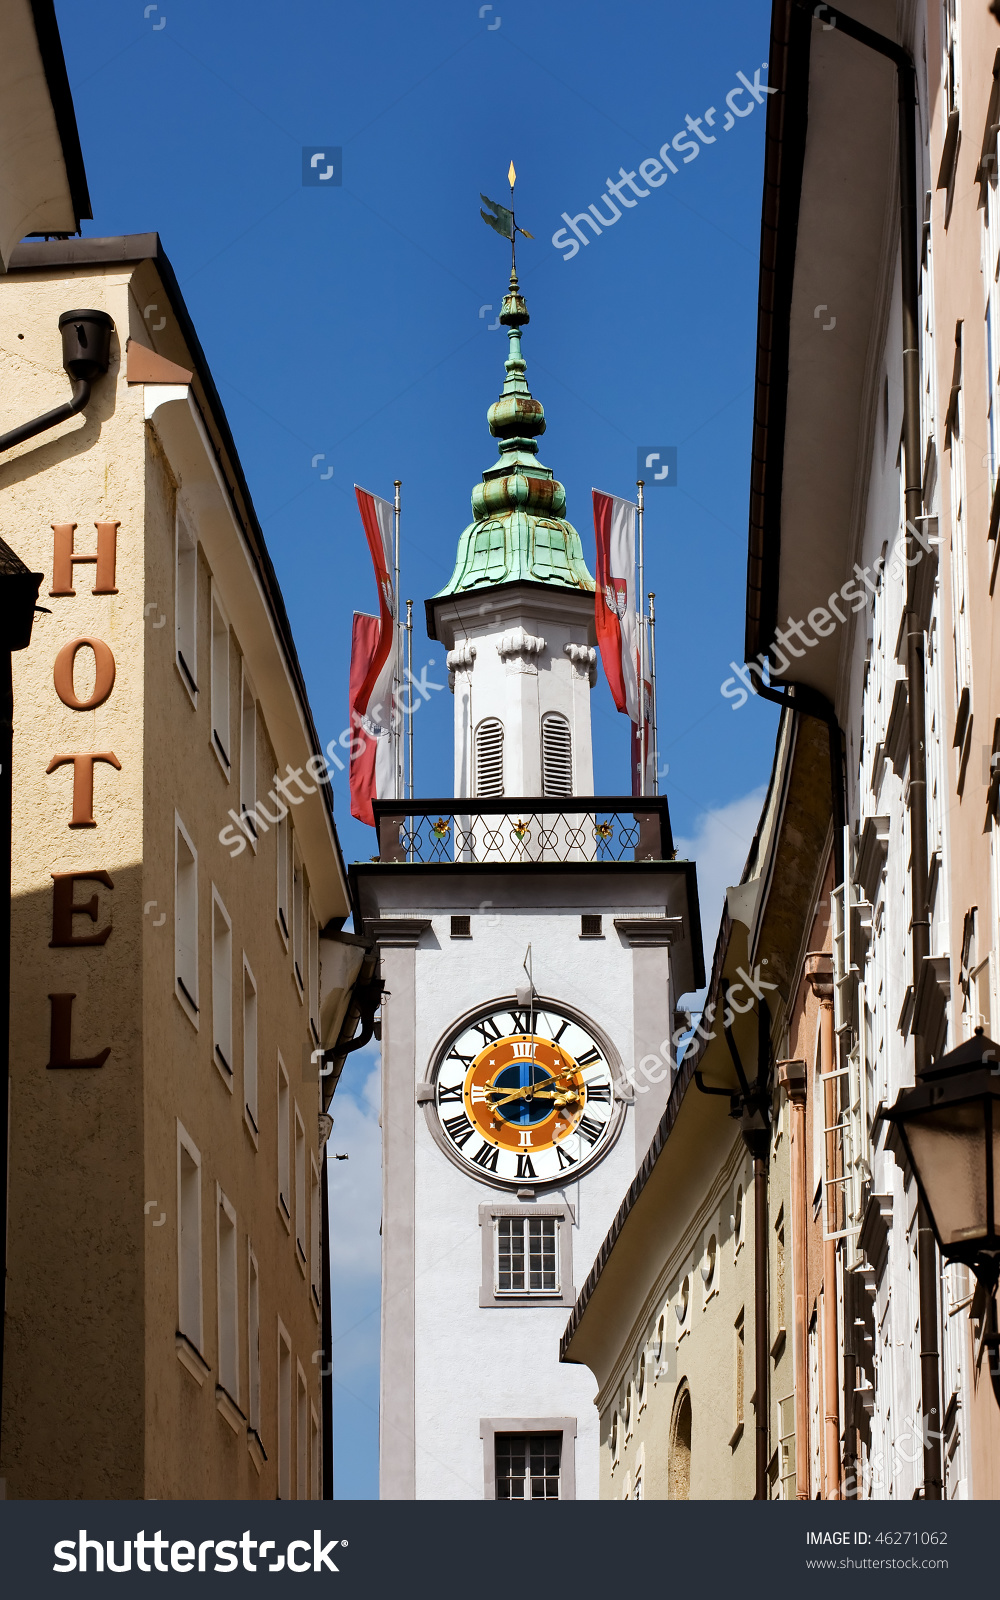 Clock Tower Of Old Town Hall In Salzburg Stock Photo 46271062.